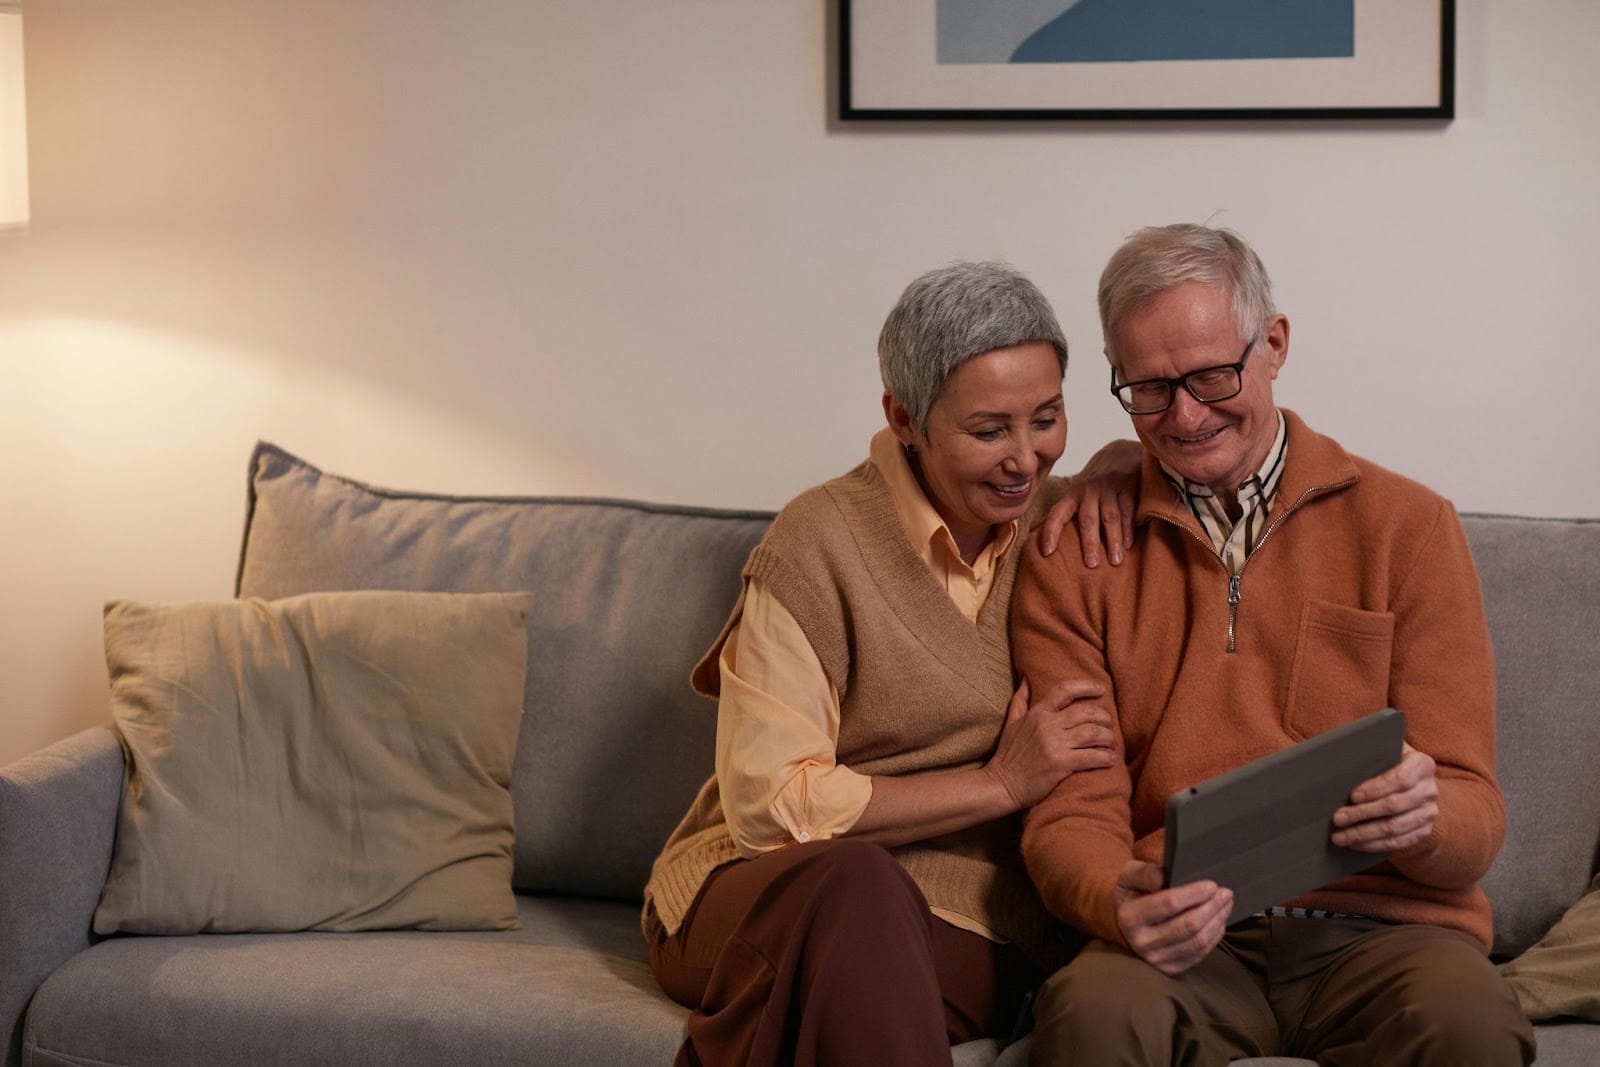 A senior citizen couple smiling while holding a digital tablet